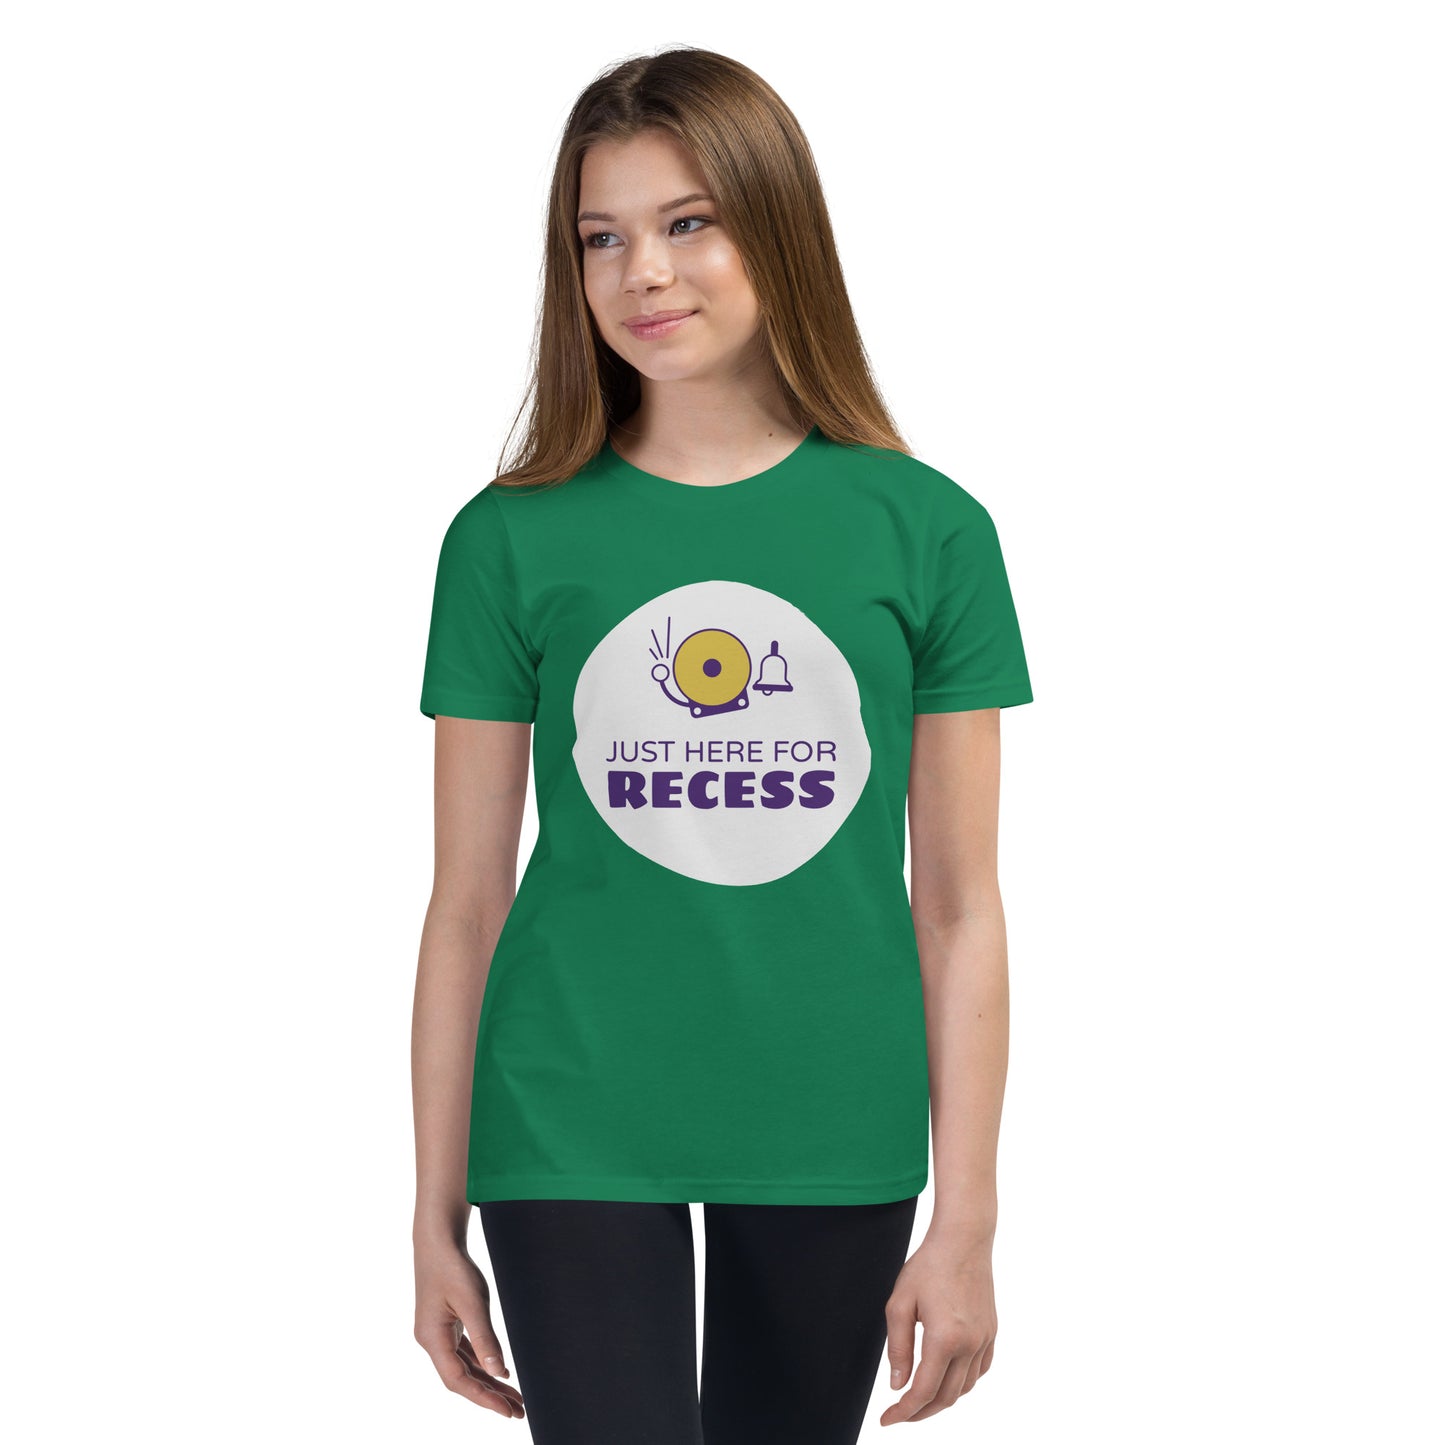 Just here for Recess Youth Short Sleeve T-Shirt